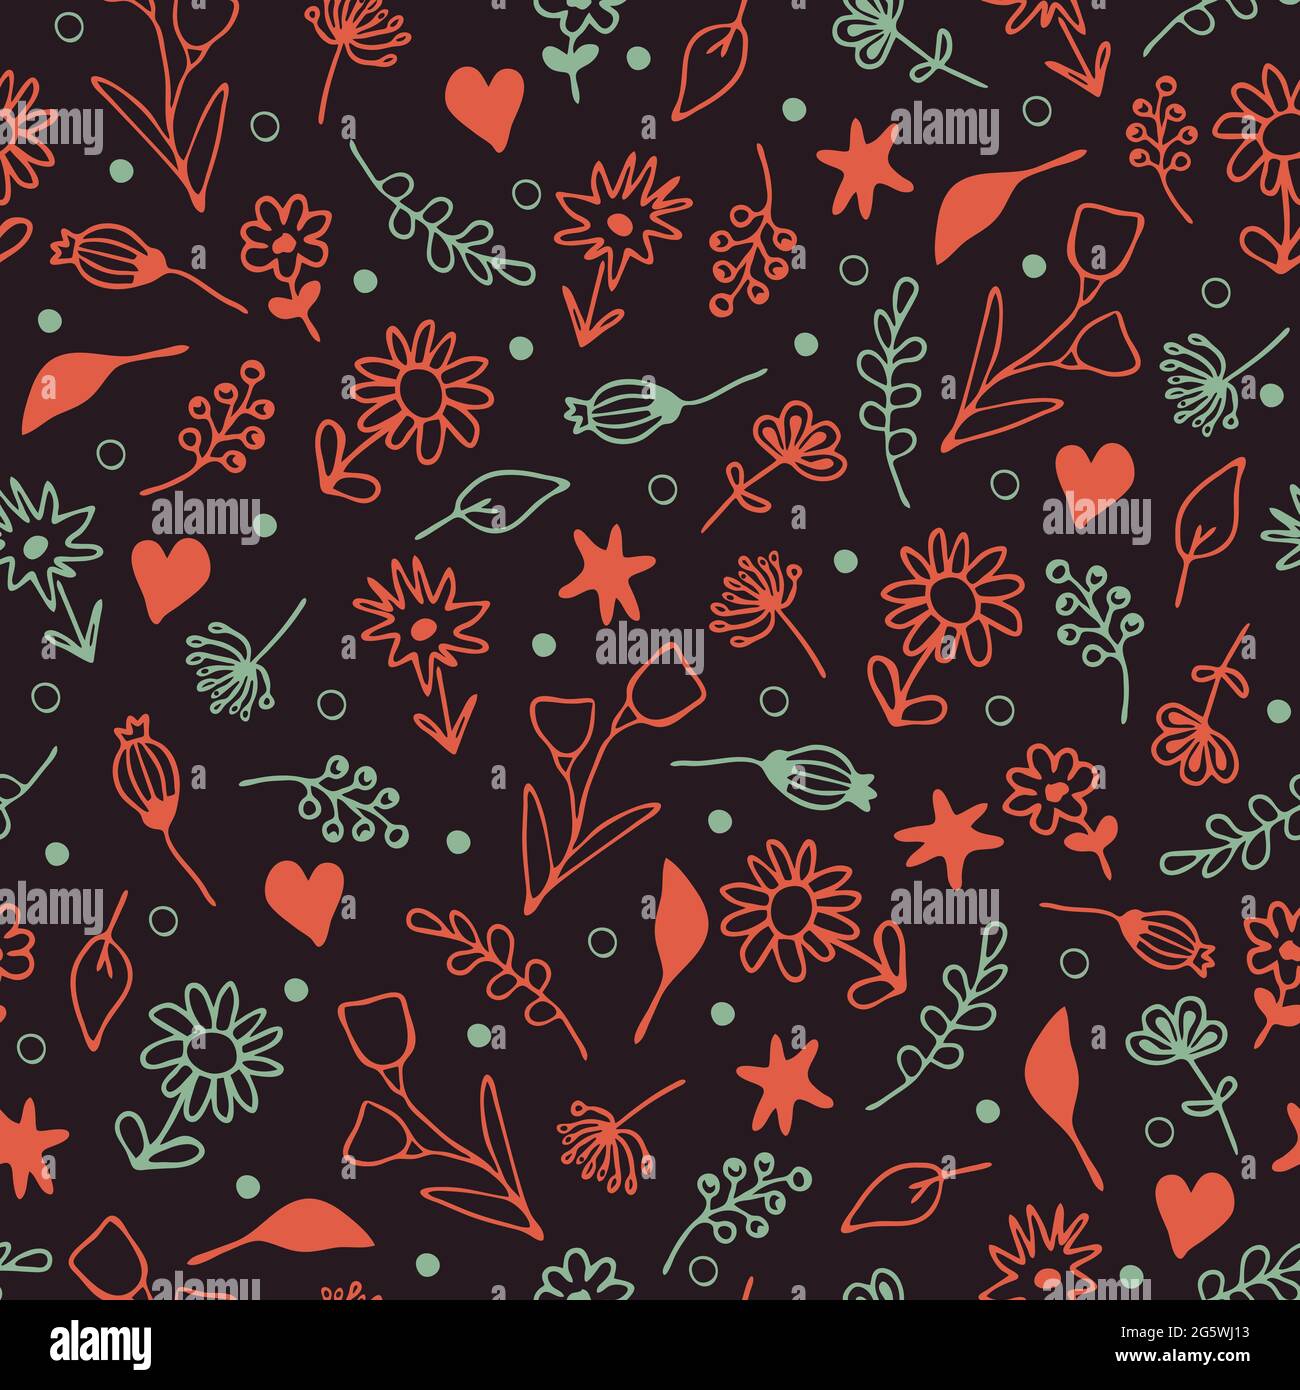 Seamless Vector Pattern With Small Flowers On Dark Brown